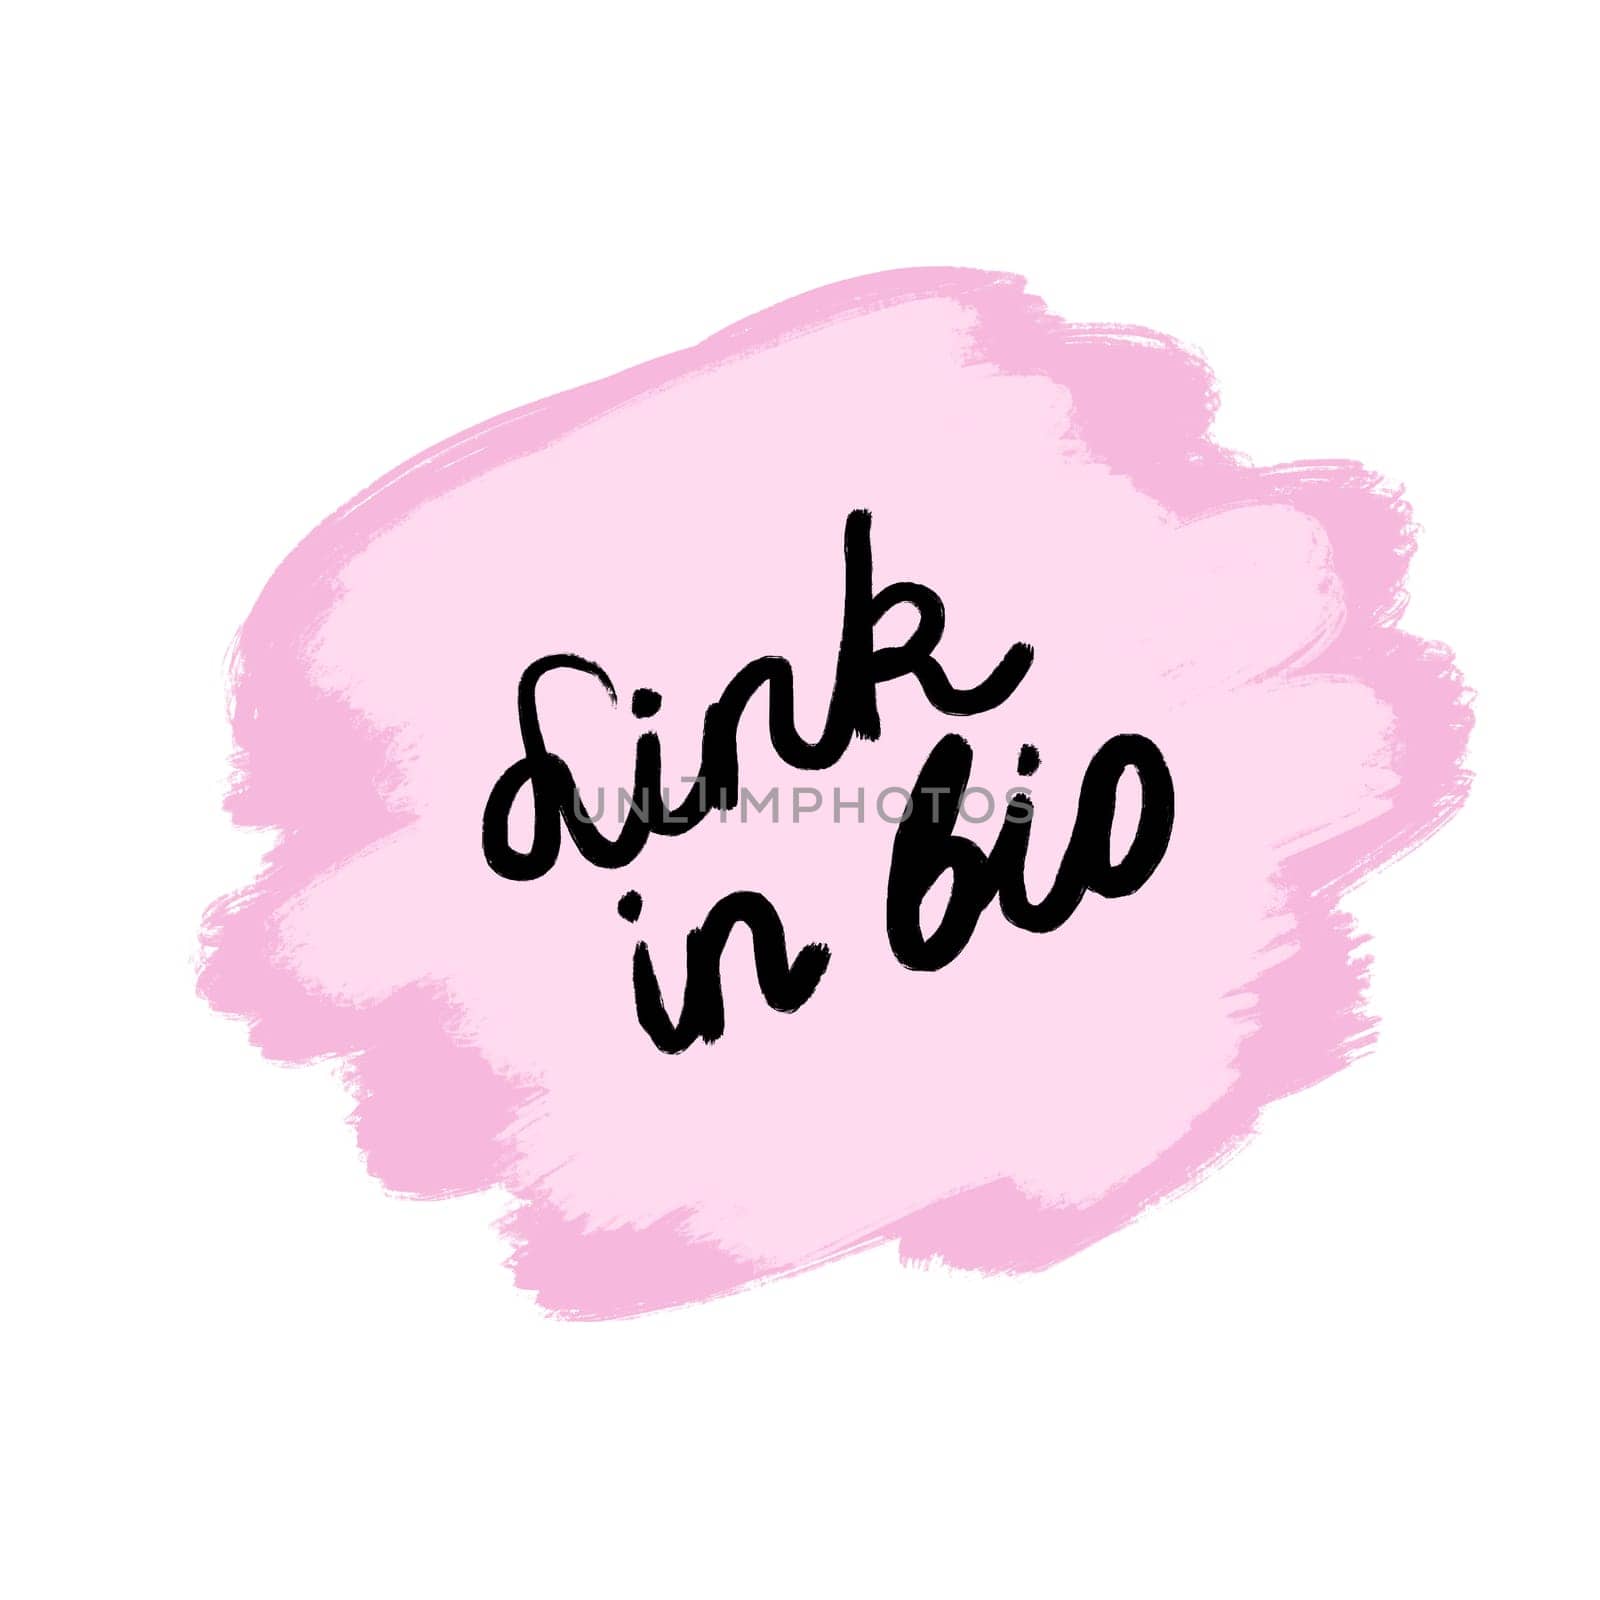 Hand drawn illustration of link in bio pink shape sticker. Words in black written on pastel round blob, internet marketing sign reference, click here button icon, graphic digital outline design